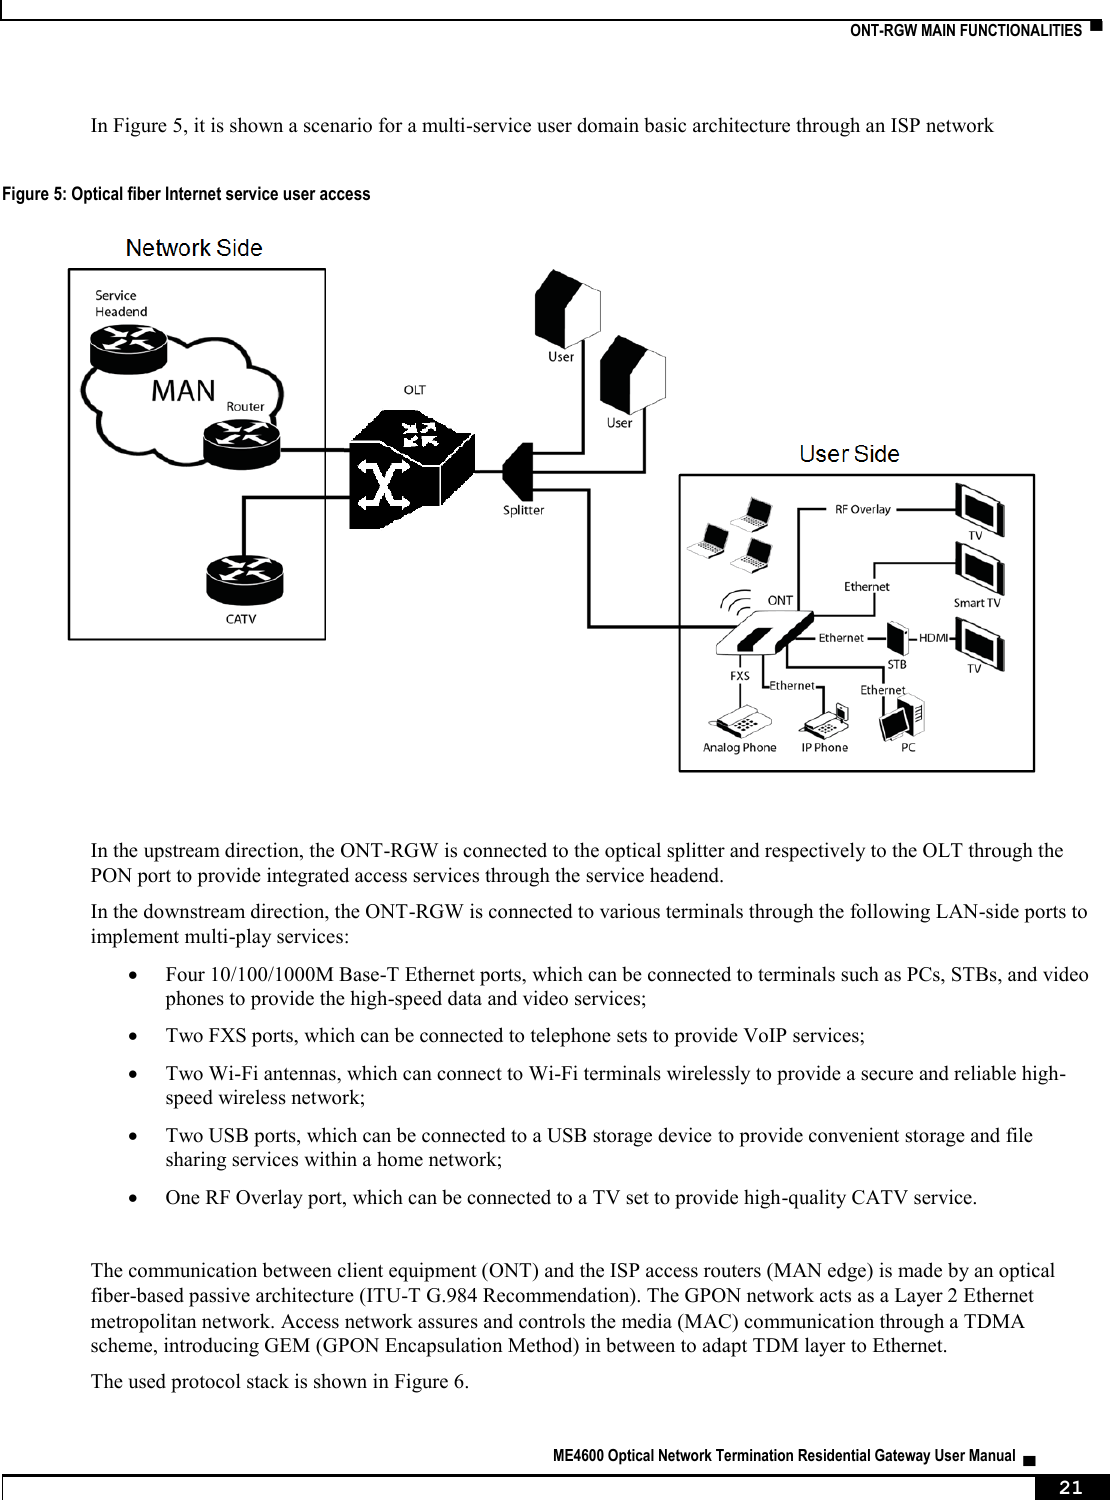    ONT-RGW MAIN FUNCTIONALITIES  ▀   ME4600 Optical Network Termination Residential Gateway User Manual  ▄     21 In Figure 5, it is shown a scenario for a multi-service user domain basic architecture through an ISP network  Figure 5: Optical fiber Internet service user access    In the upstream direction, the ONT-RGW is connected to the optical splitter and respectively to the OLT through the PON port to provide integrated access services through the service headend. In the downstream direction, the ONT-RGW is connected to various terminals through the following LAN-side ports to implement multi-play services:  Four 10/100/1000M Base-T Ethernet ports, which can be connected to terminals such as PCs, STBs, and video phones to provide the high-speed data and video services;  Two FXS ports, which can be connected to telephone sets to provide VoIP services;  Two Wi-Fi antennas, which can connect to Wi-Fi terminals wirelessly to provide a secure and reliable high-speed wireless network;  Two USB ports, which can be connected to a USB storage device to provide convenient storage and file sharing services within a home network;  One RF Overlay port, which can be connected to a TV set to provide high-quality CATV service.  The communication between client equipment (ONT) and the ISP access routers (MAN edge) is made by an optical fiber-based passive architecture (ITU-T G.984 Recommendation). The GPON network acts as a Layer 2 Ethernet metropolitan network. Access network assures and controls the media (MAC) communication through a TDMA scheme, introducing GEM (GPON Encapsulation Method) in between to adapt TDM layer to Ethernet. The used protocol stack is shown in Figure 6. 